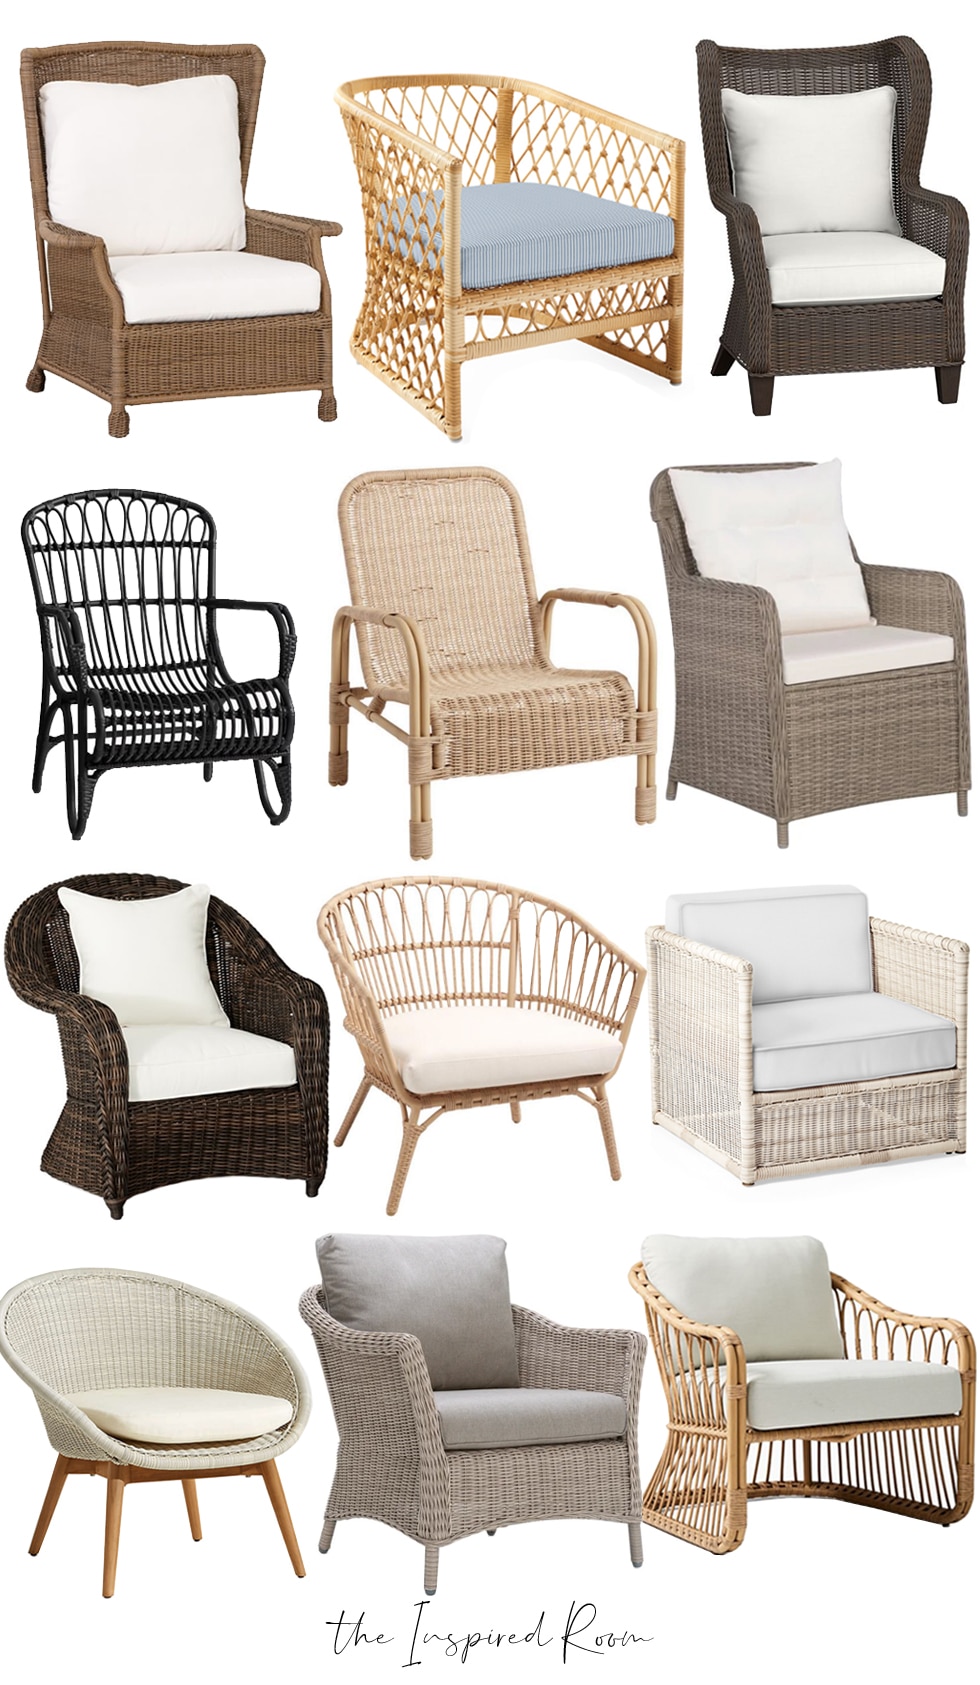 Outdoor Lounge Chair Furniture And, The Yard Outdoor Furniture Seabrook